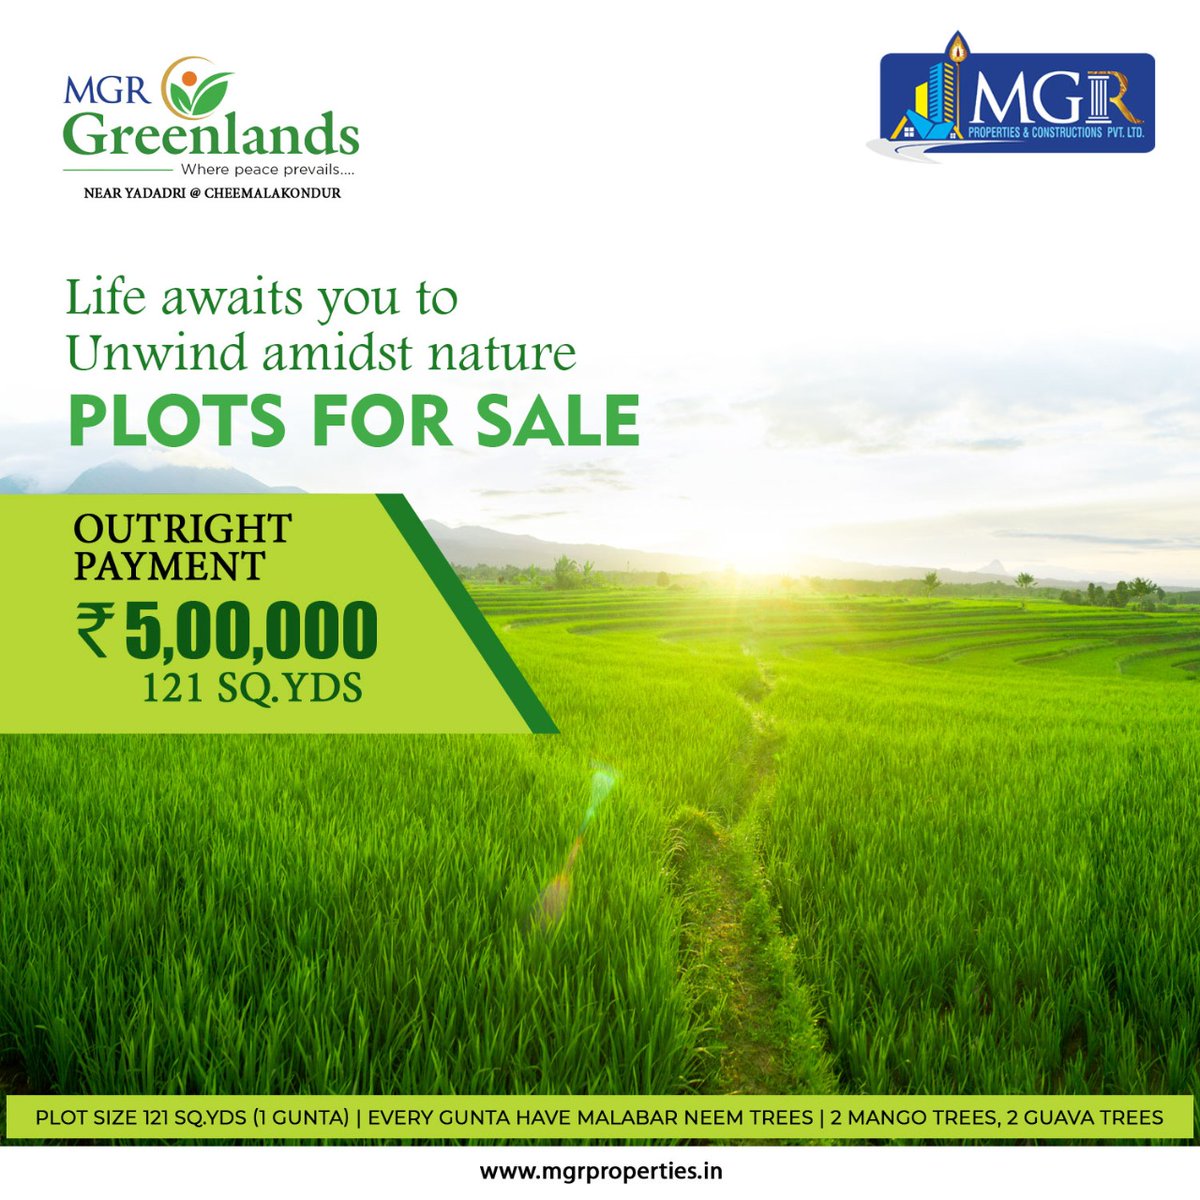 The Highest Opportunity to Give a Golden Future to the Future Generations
Invest Now in Greenlands
Book Your Plot Today!!
Call Us: 9848229966
E-Mail: info@mgrproperties.in 
#greenlands #realestateinhyderabad #FarmLands #farmlandforsaleinhyderabad #farmplots #farmvillas